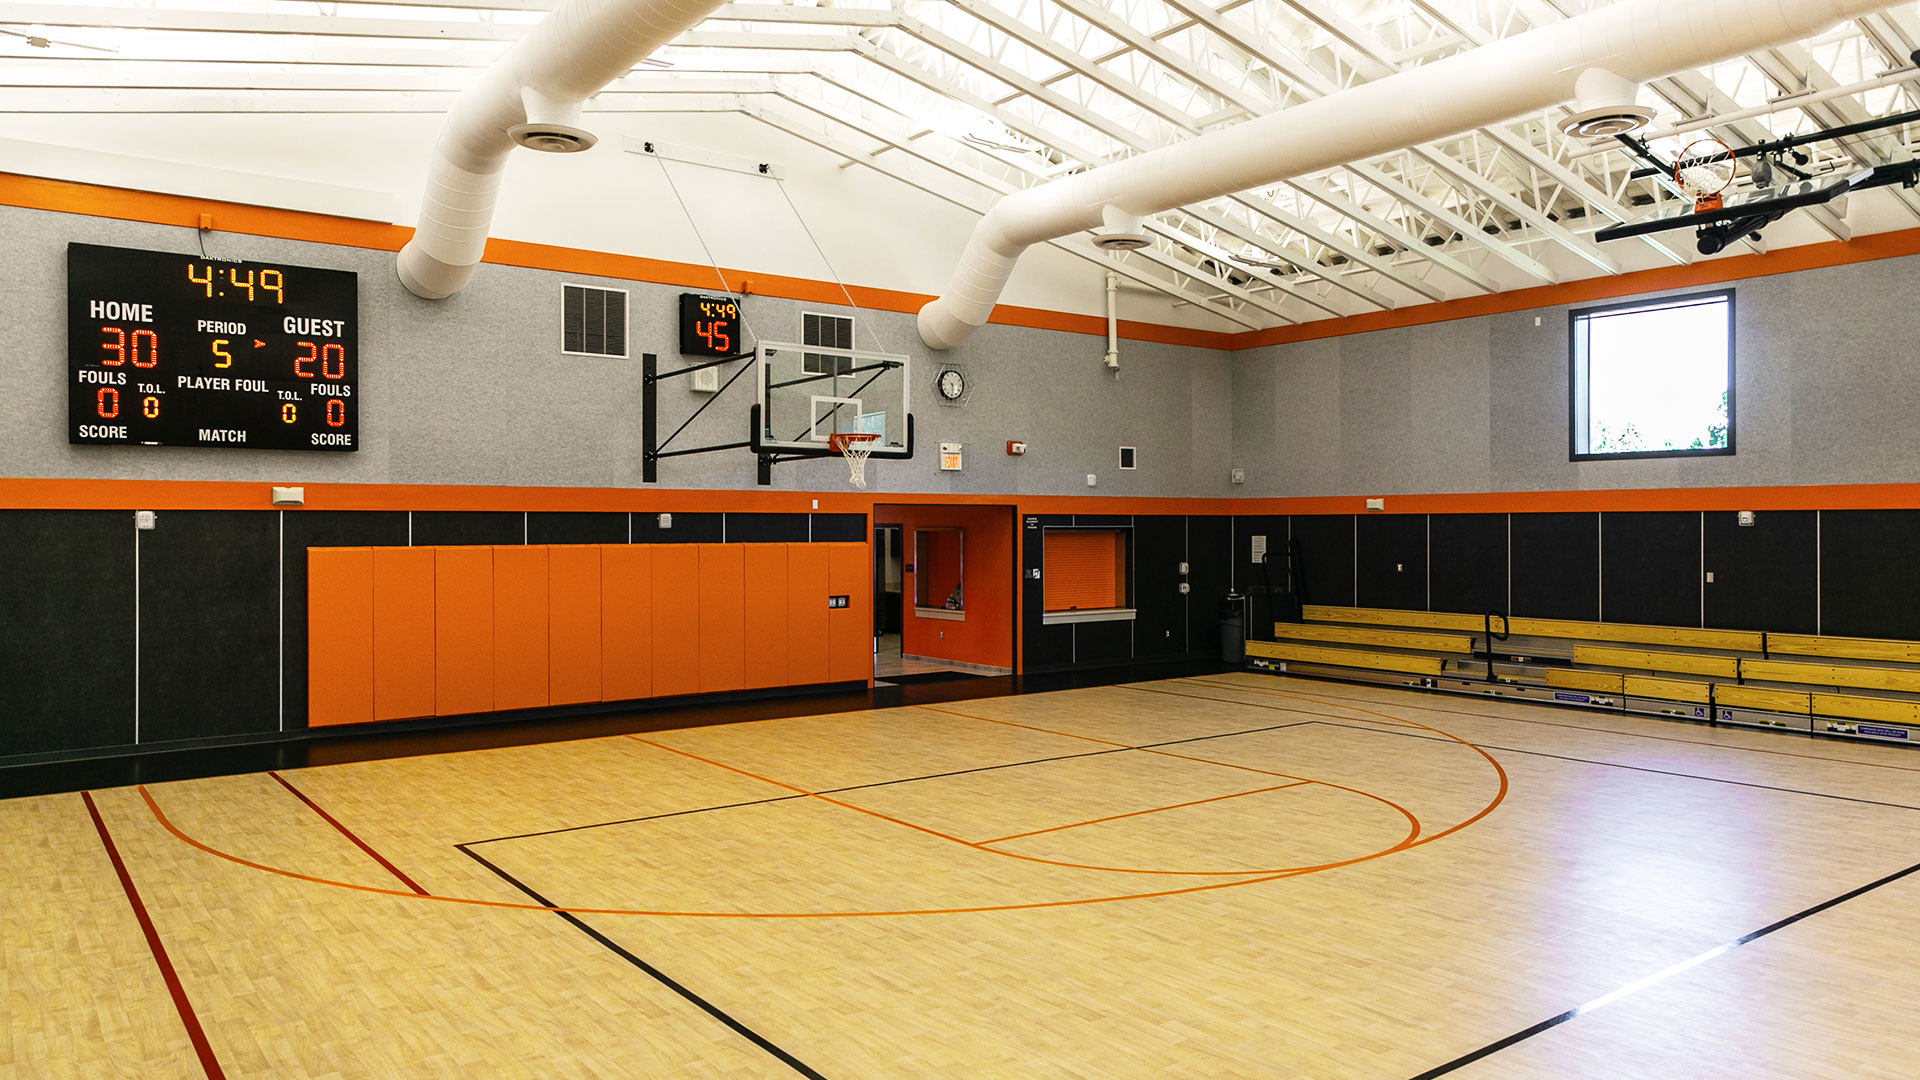 Interior of gym, looking at snack shack area with small bleachers adjacent. Shot clock above basketball hoop.